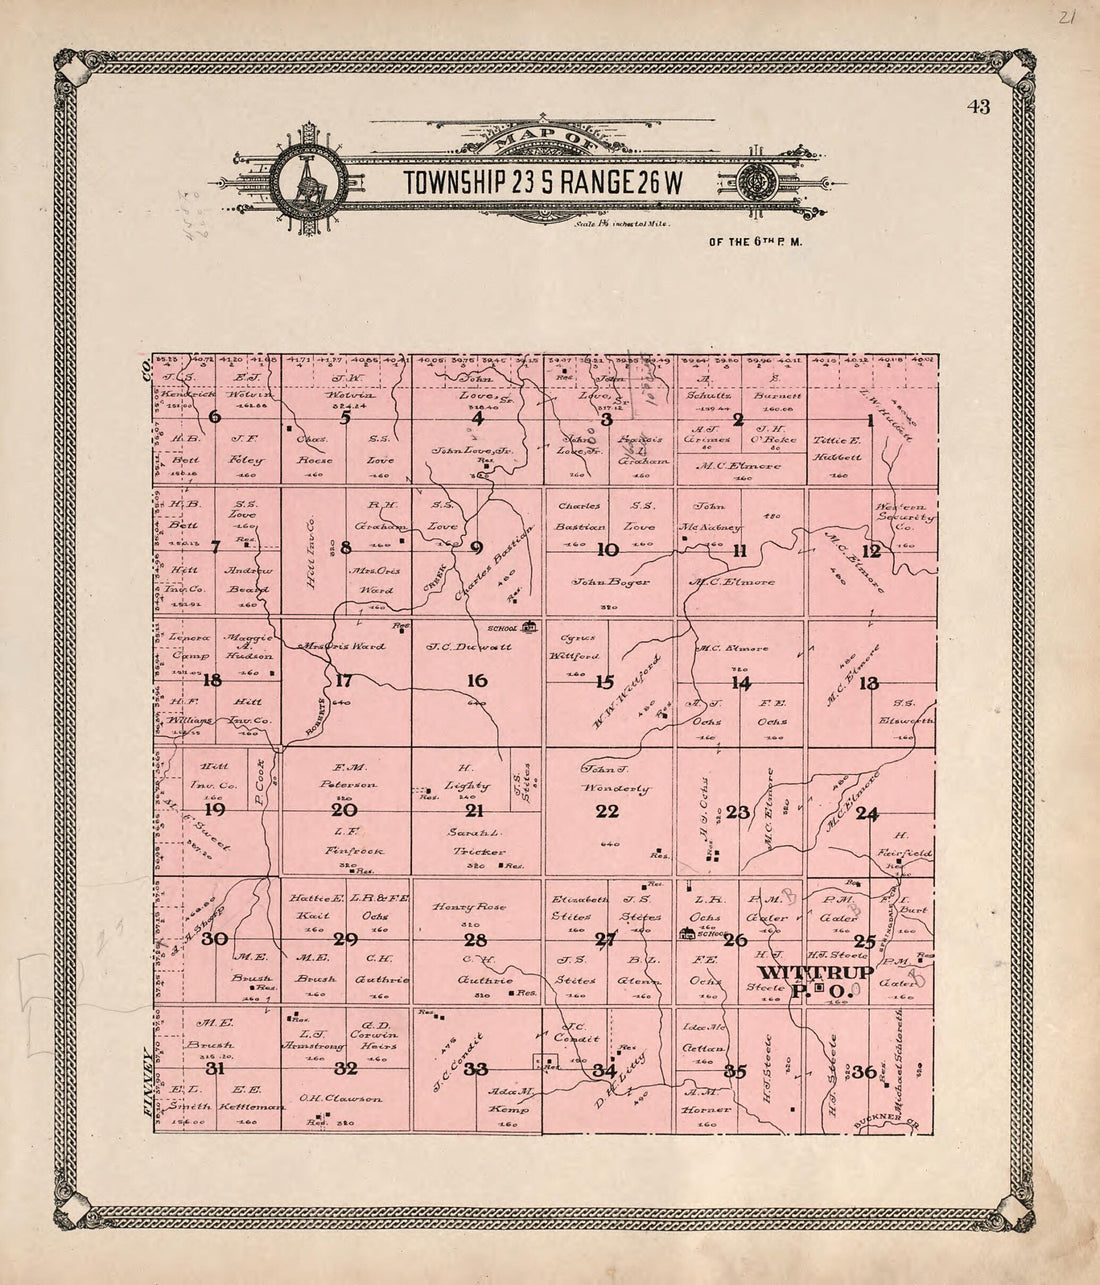 This old map of Map of Township 23 S Range 26 W from Standard Atlas of Hodgeman County, Kansas from 1907 was created by  Geo. A. Ogle &amp; Co in 1907